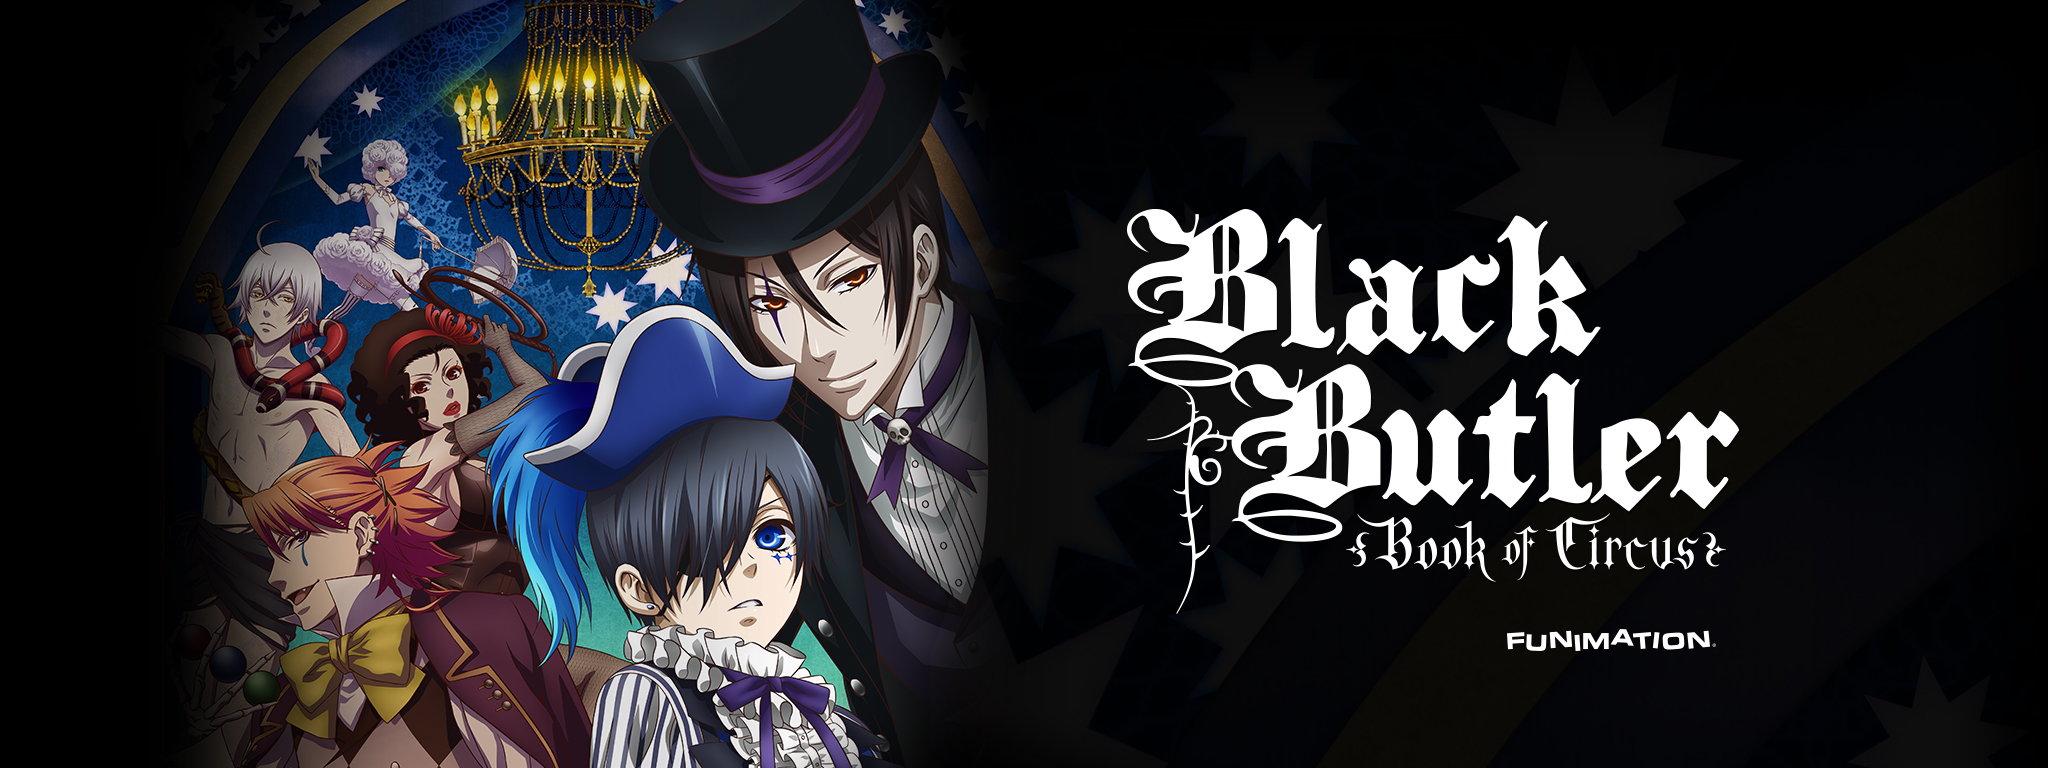 Watch Black Butler: Book of Circus Free Online